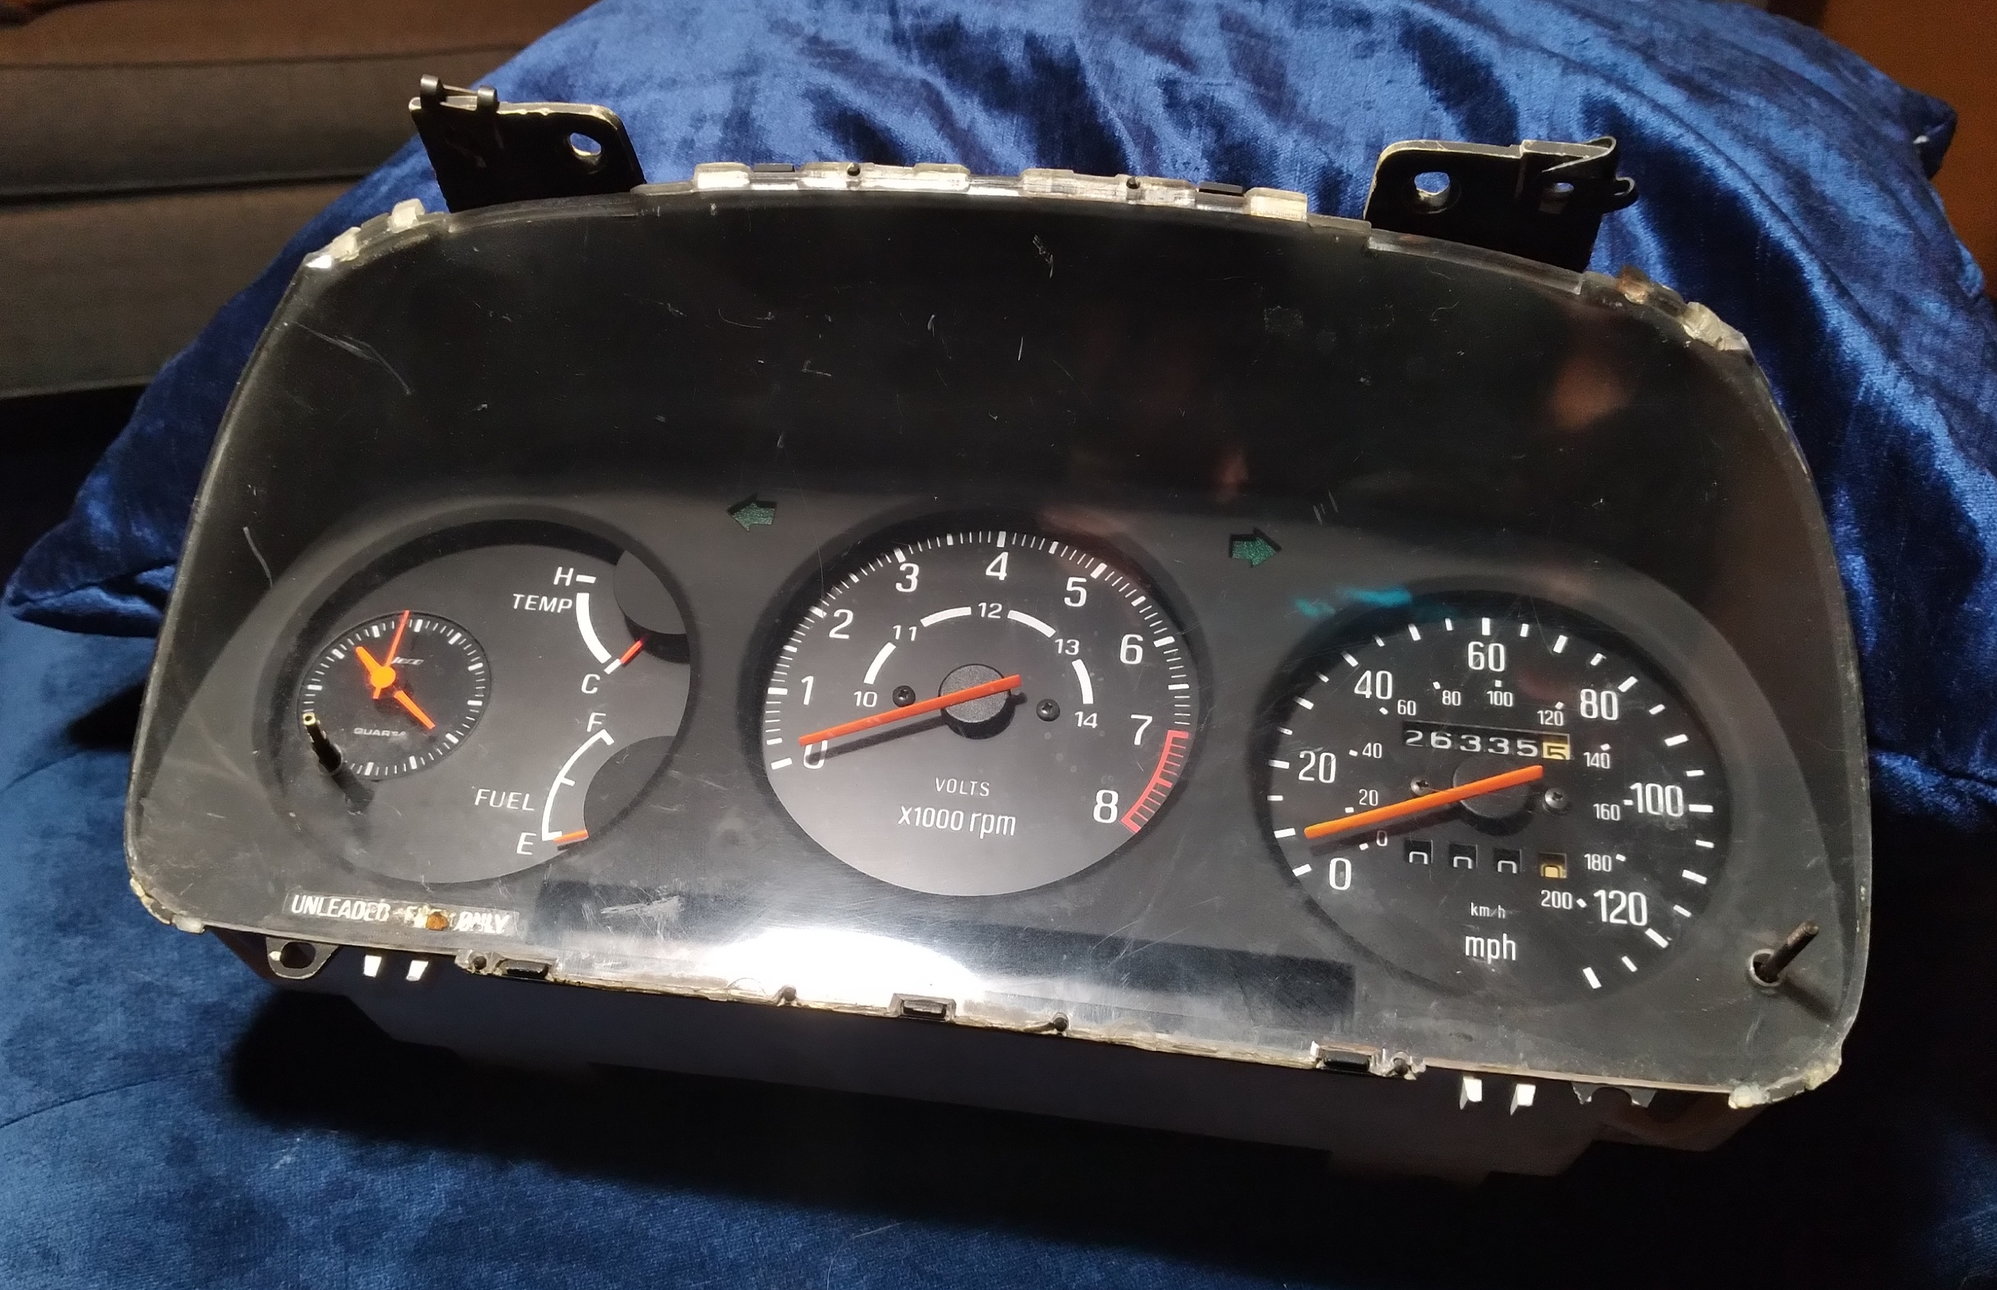 Audio Video/Electronics - 1980-1985 RX7 instrument Cluster/Speedometer - Used - 1980 to 1985 Mazda RX-7 - Savannah, GA 31407, United States